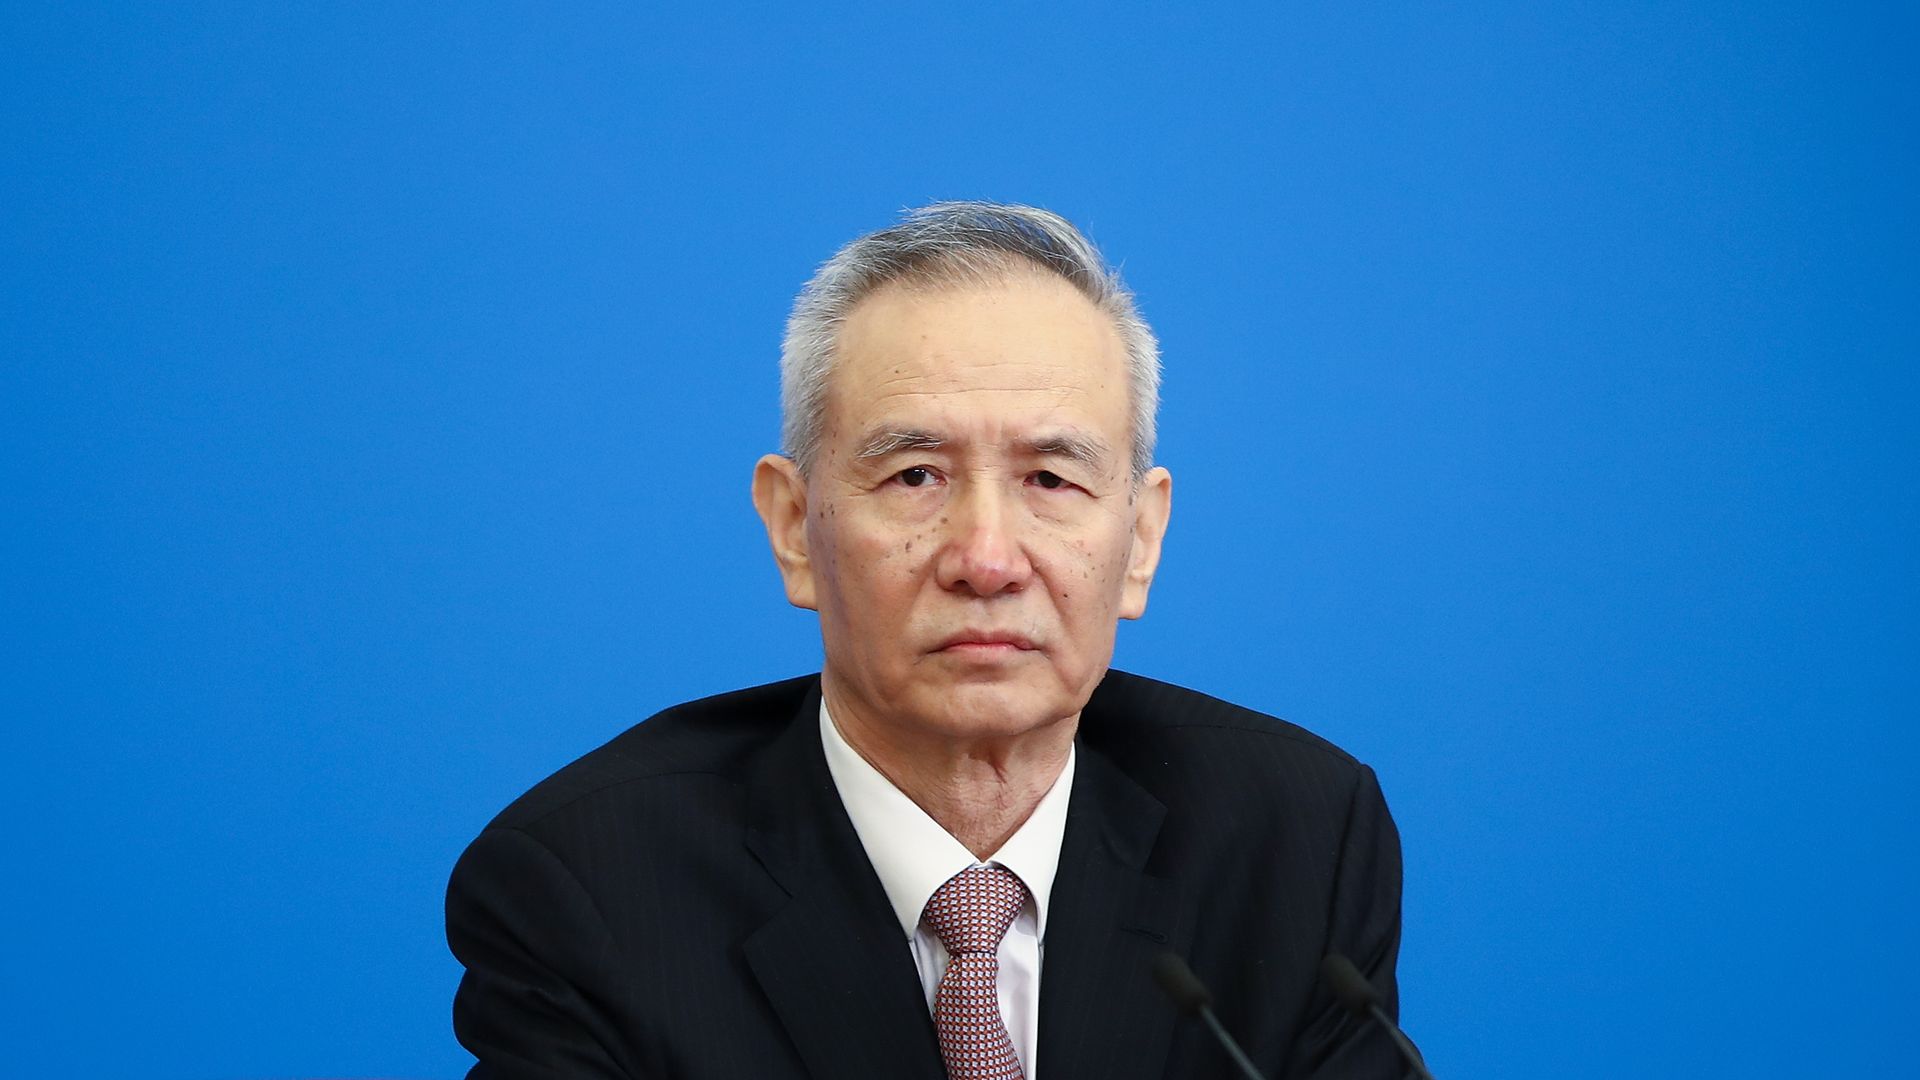 Liu He, China's vice premier and director of the central leading group of the CCP, attends a news conference March 20, 2018